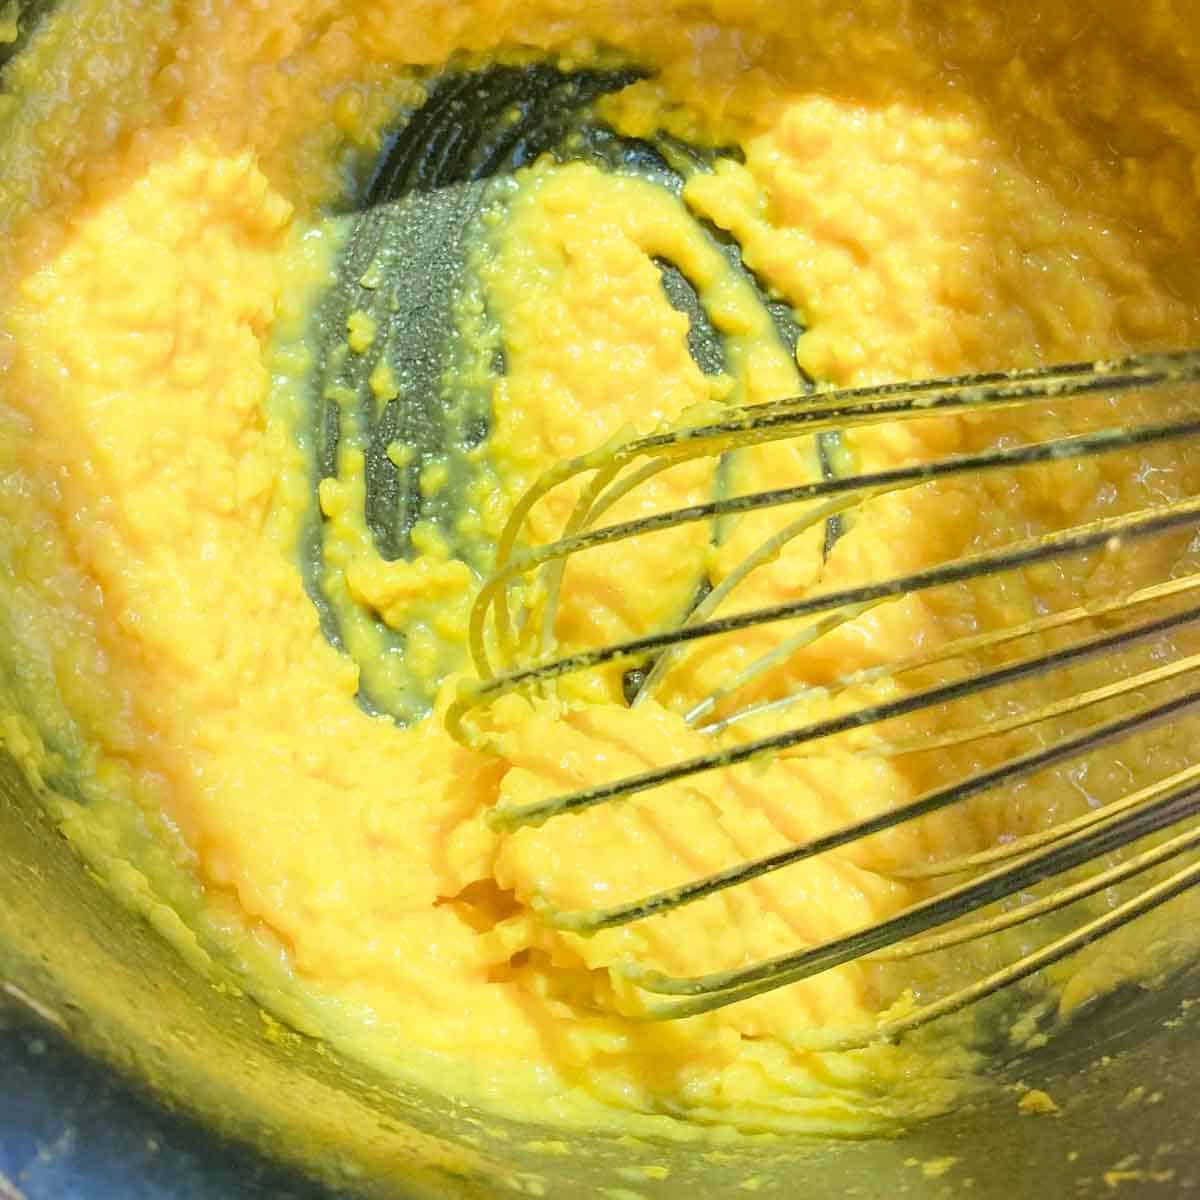 Moong dal is whisked with an egg beater to help emulsify fat and liquid